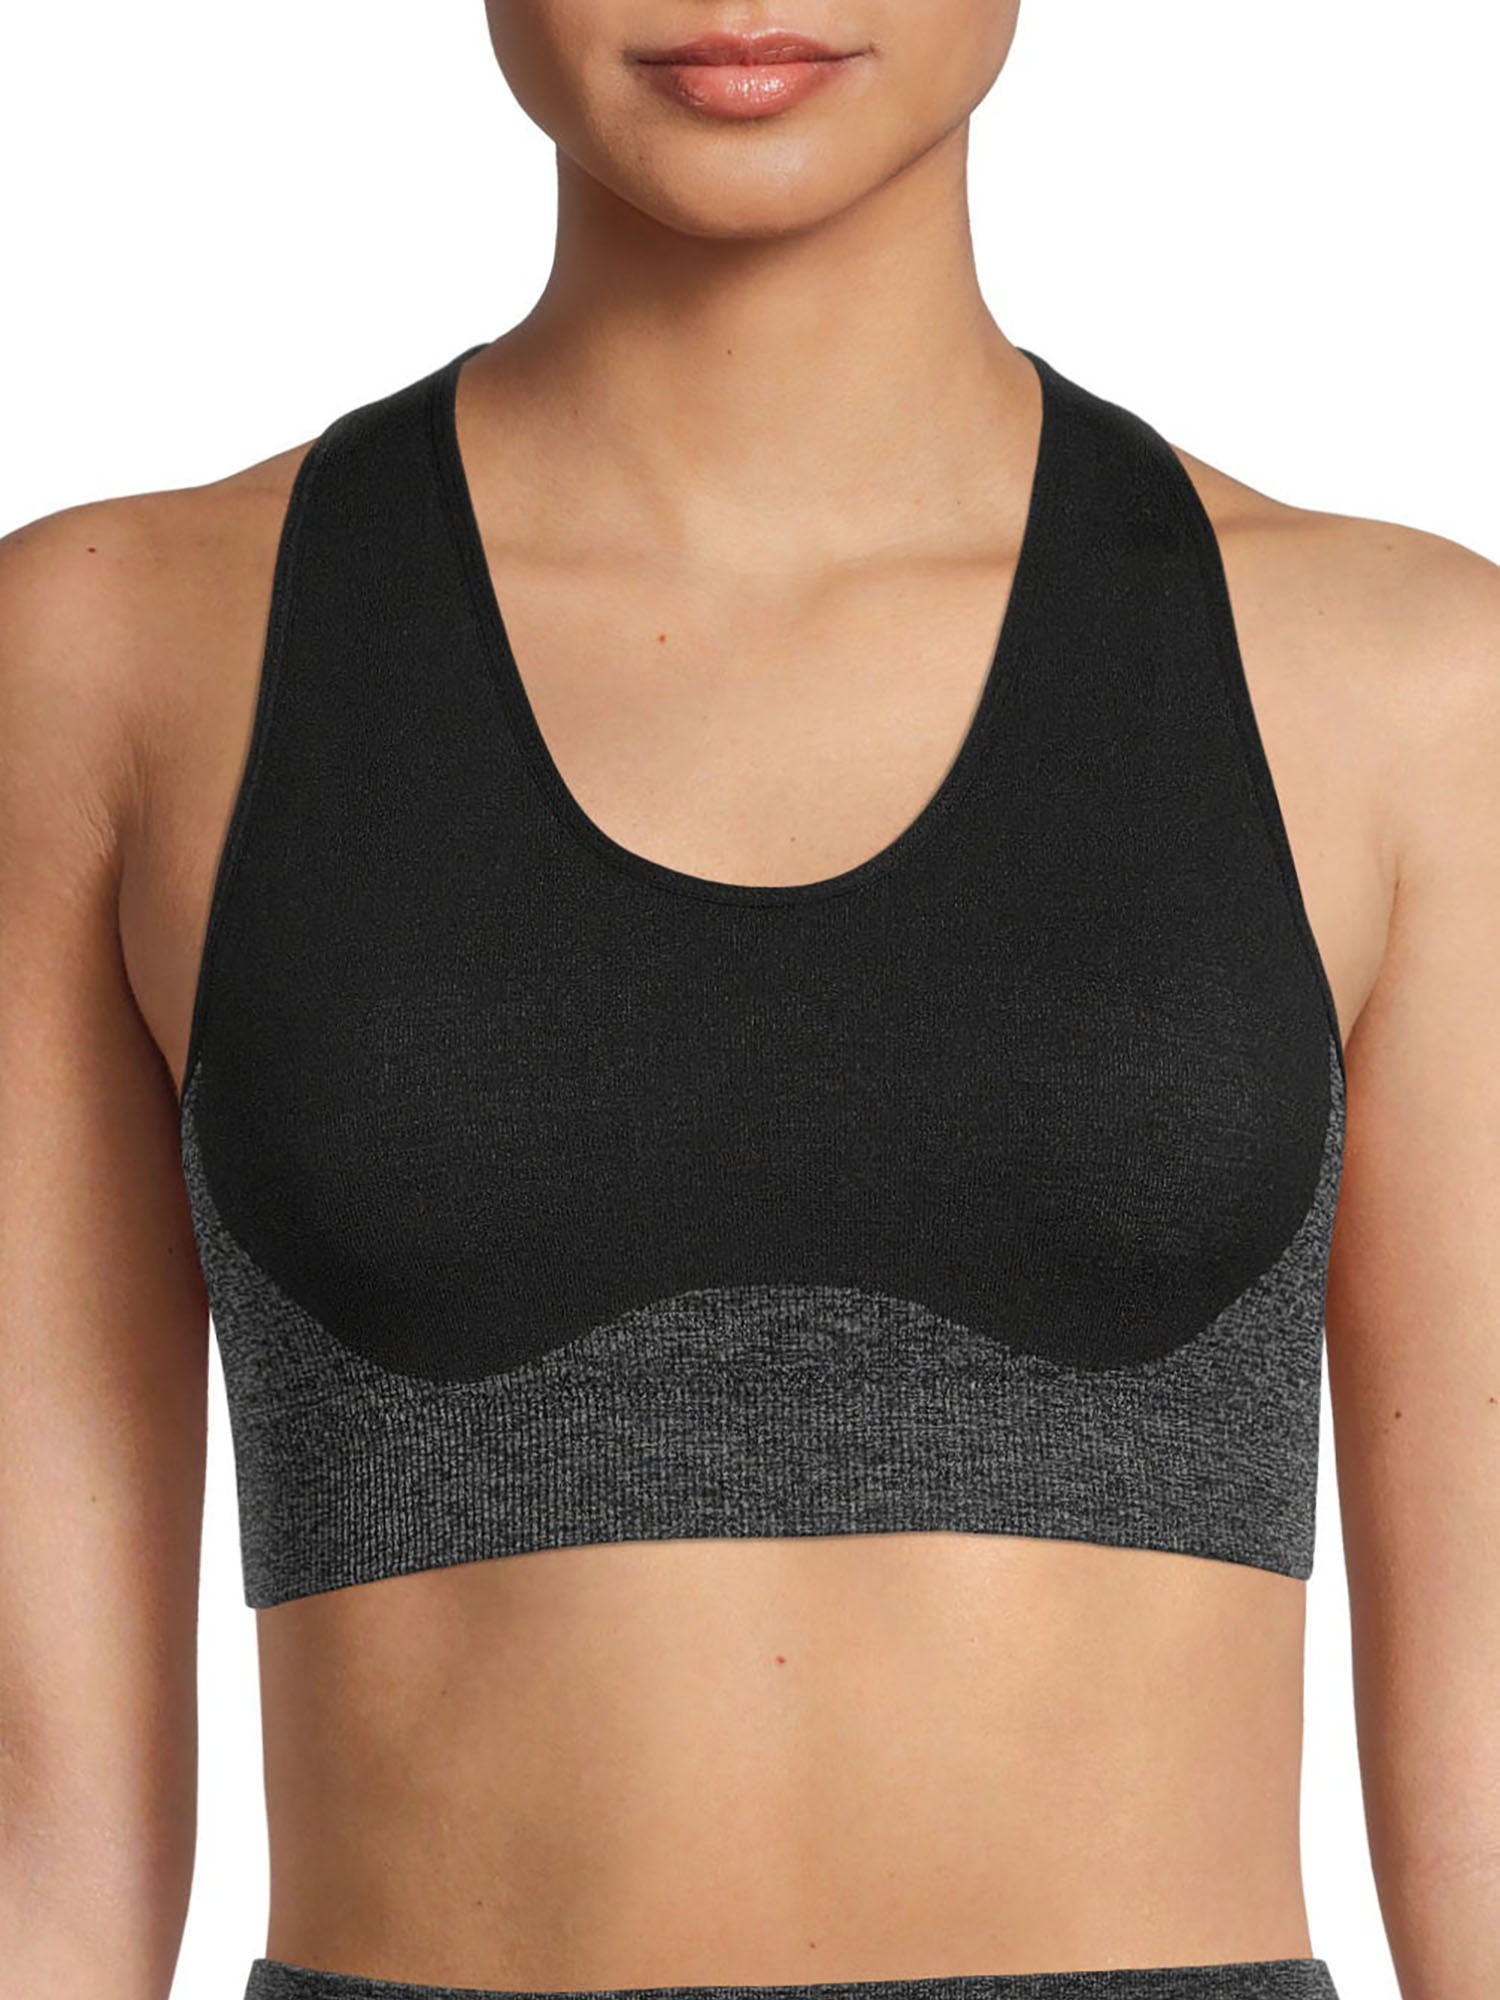 Chloe Ting Women's Seamless Sports Bra with Wide Bottom Band